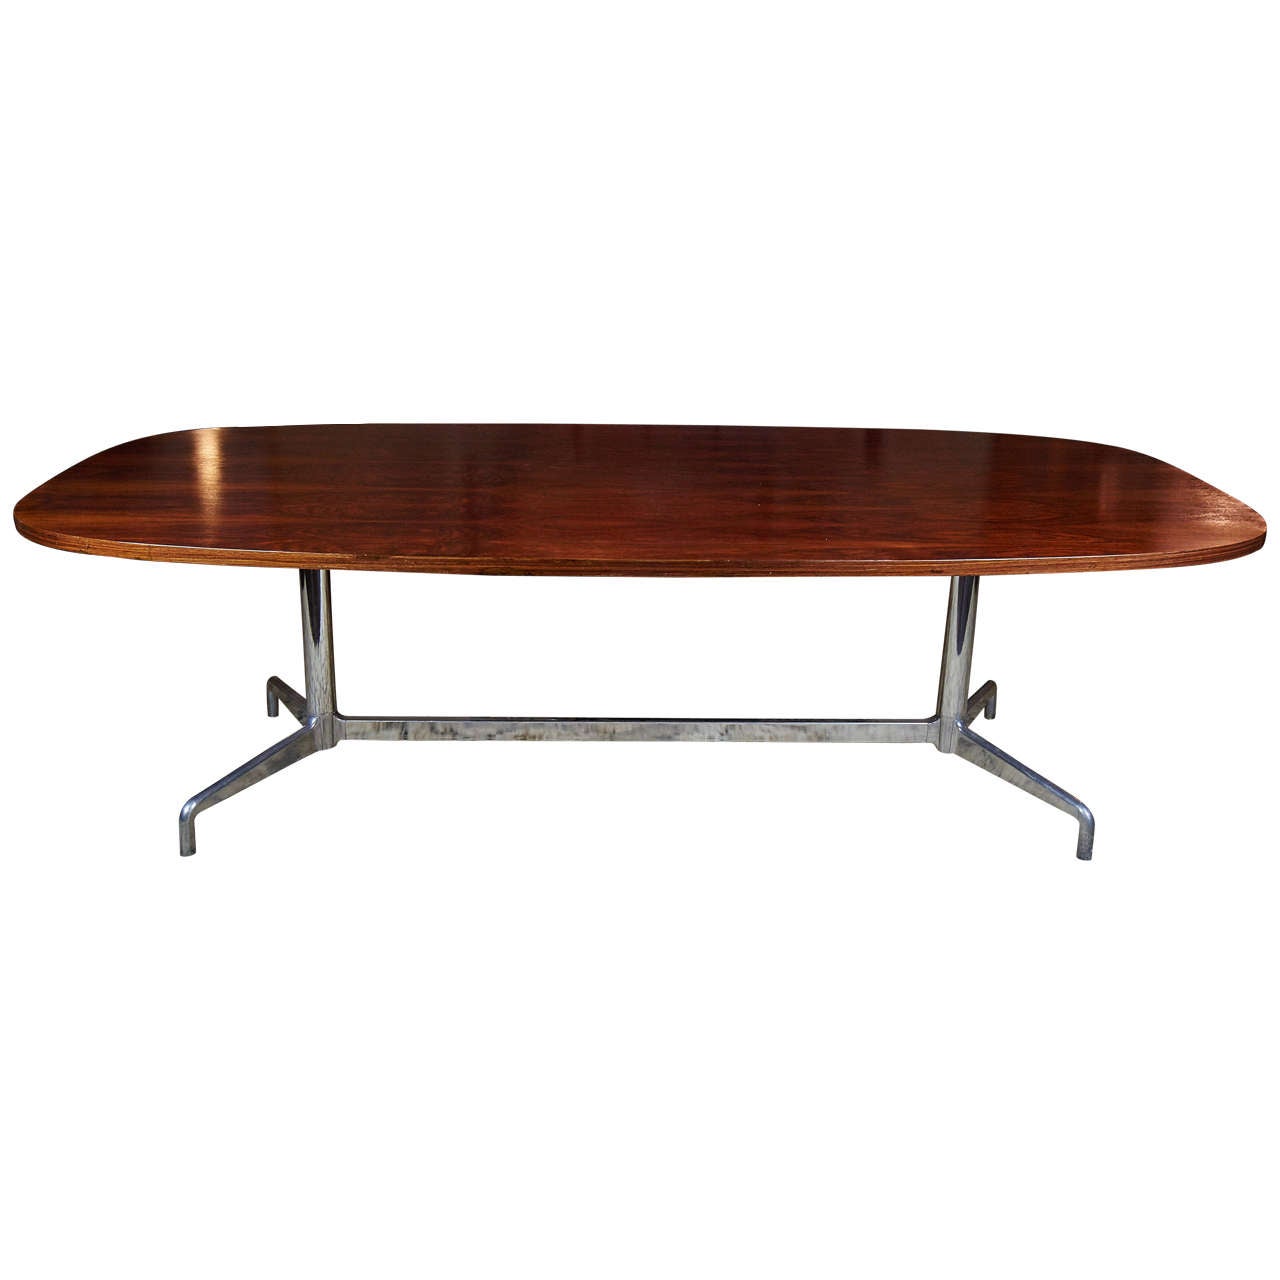 1970s Eames Conference or Dining Table